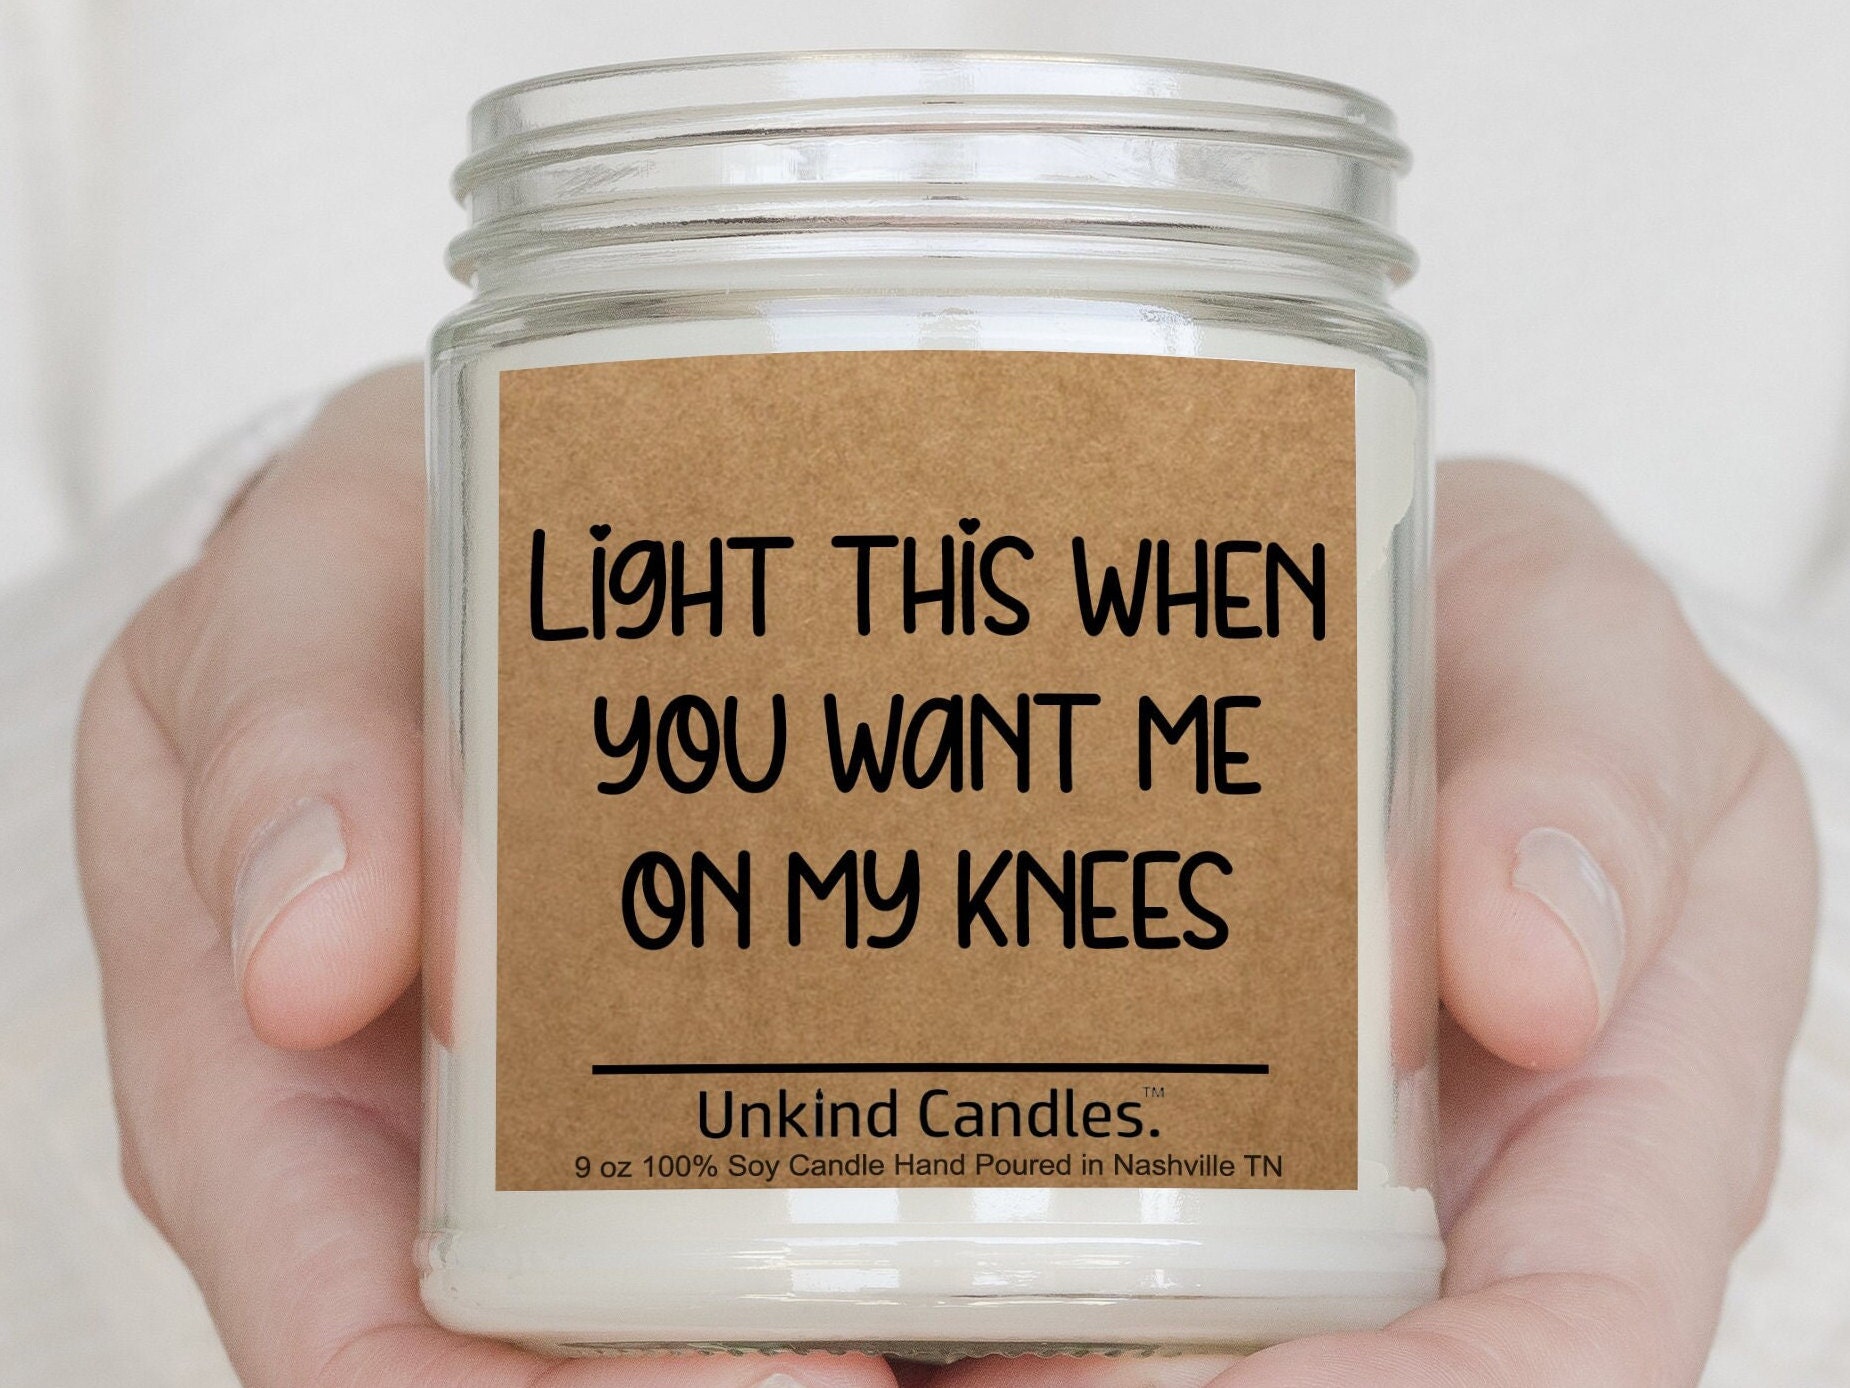 Light This When You Want Me on My Knees Funny Handmade image